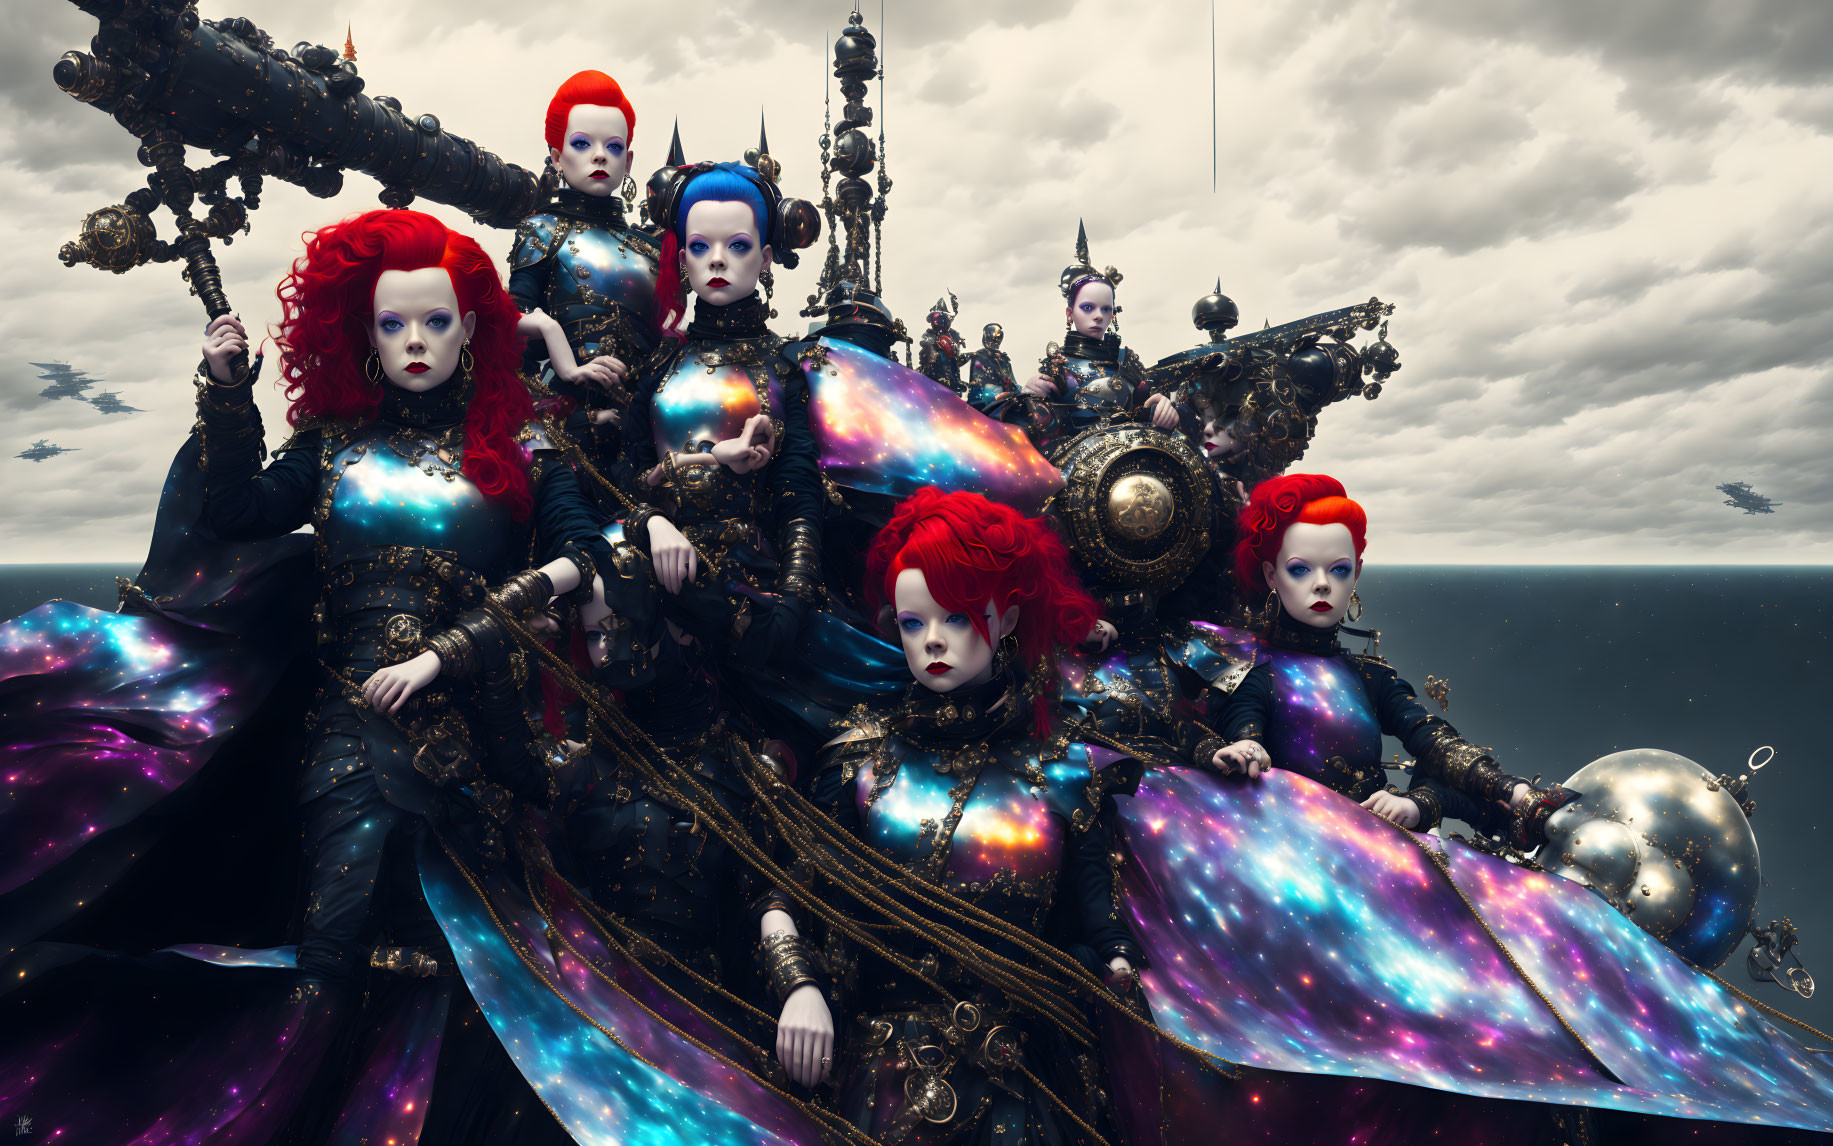 Cosmic-themed dolls with red hair on stormy seascape.